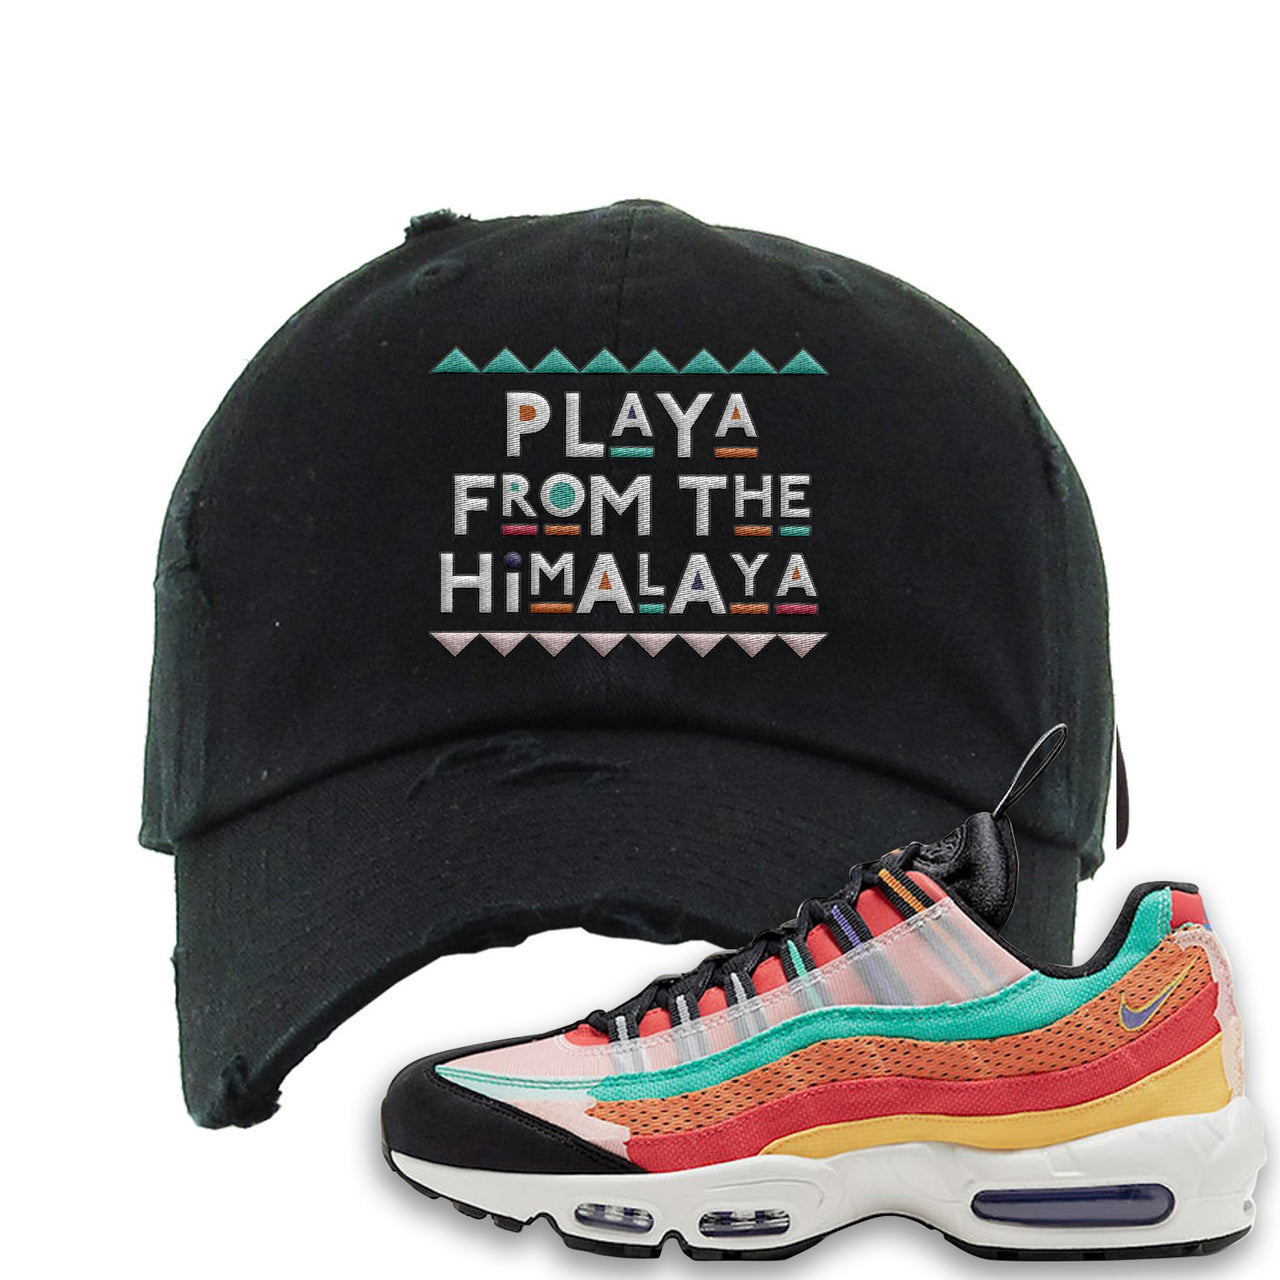 Air Max 95 Black History Month Sneaker Black Distressed Dad Hat | Hat to match Air Max 95 Black History Month Shoes | Playa From The Himalaya